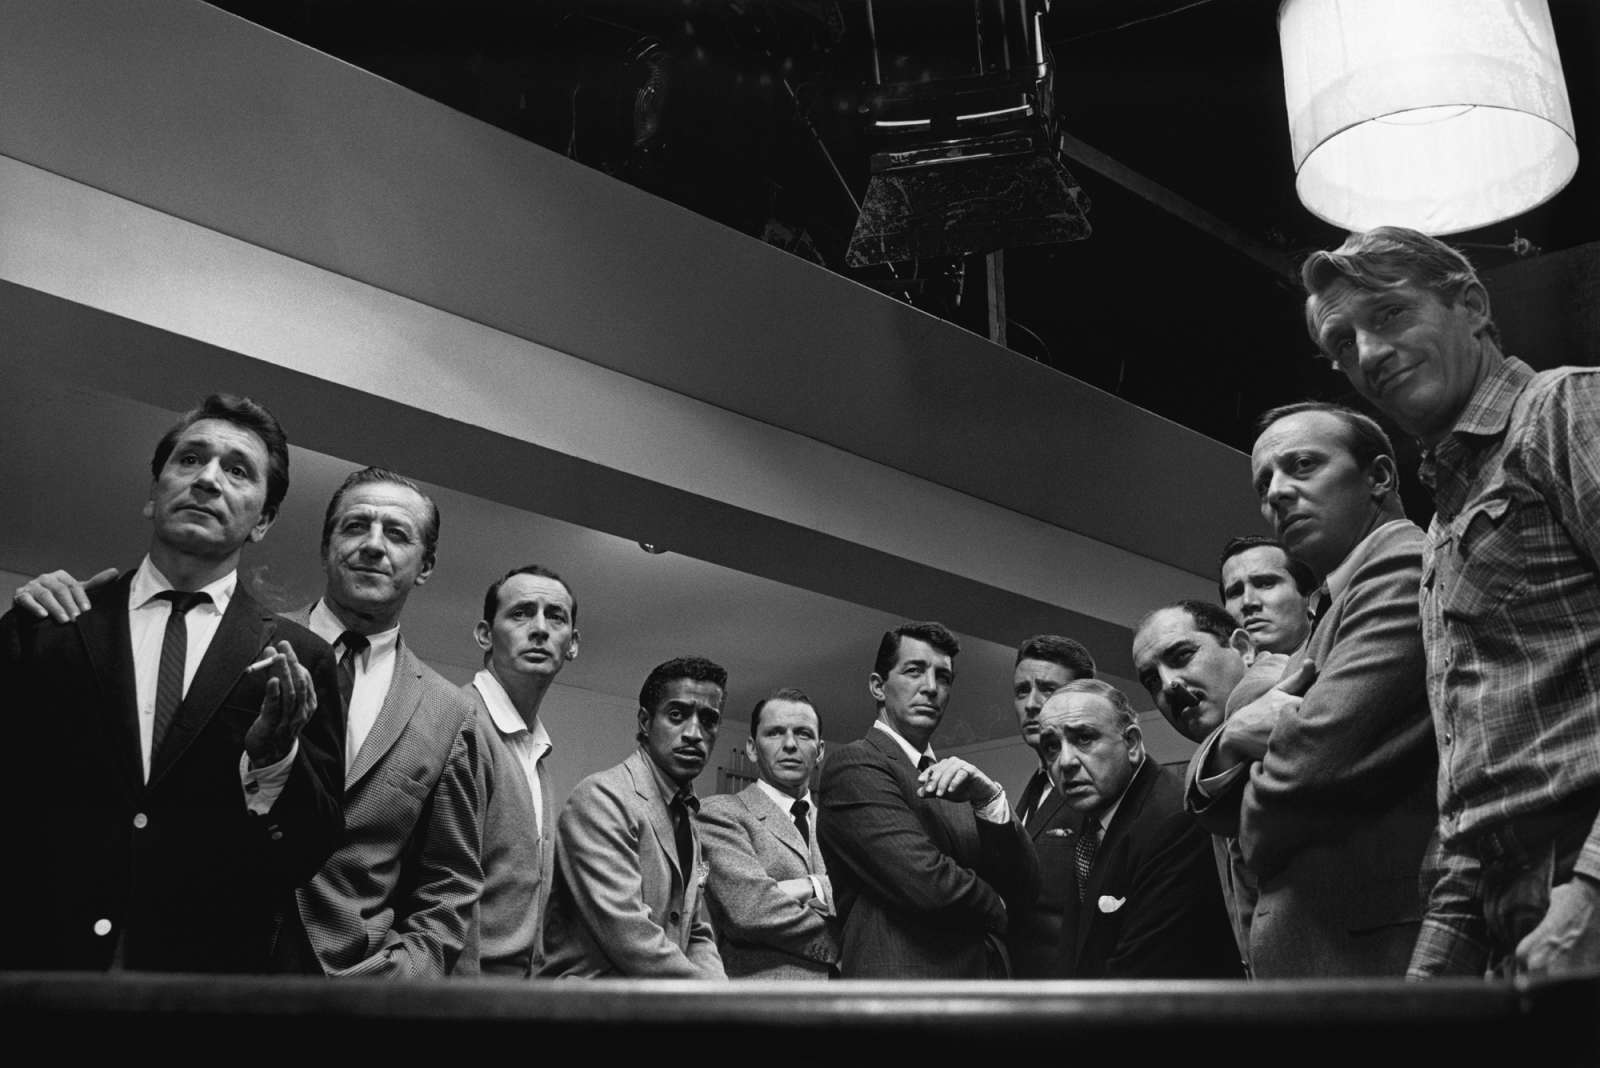 Motion Picture Television Archive, Sid Avery: Ocean's Eleven: Frank Sinatra and Cast, 1960